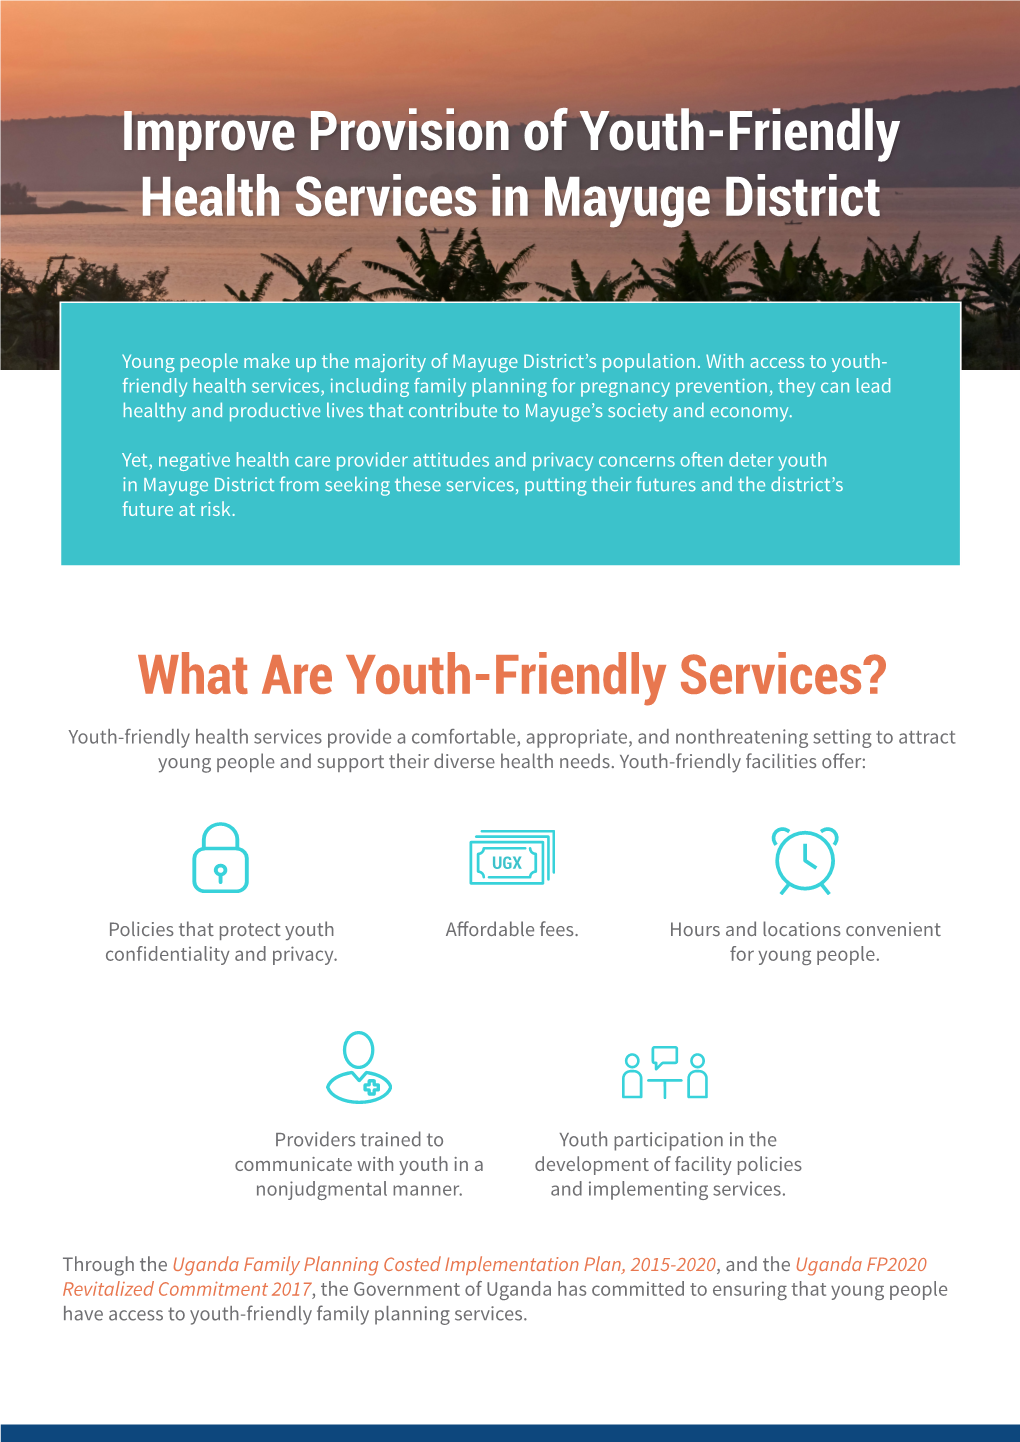 Fact Sheet. Improve Provision of Youth-Friendly Health Services in Mayuge District